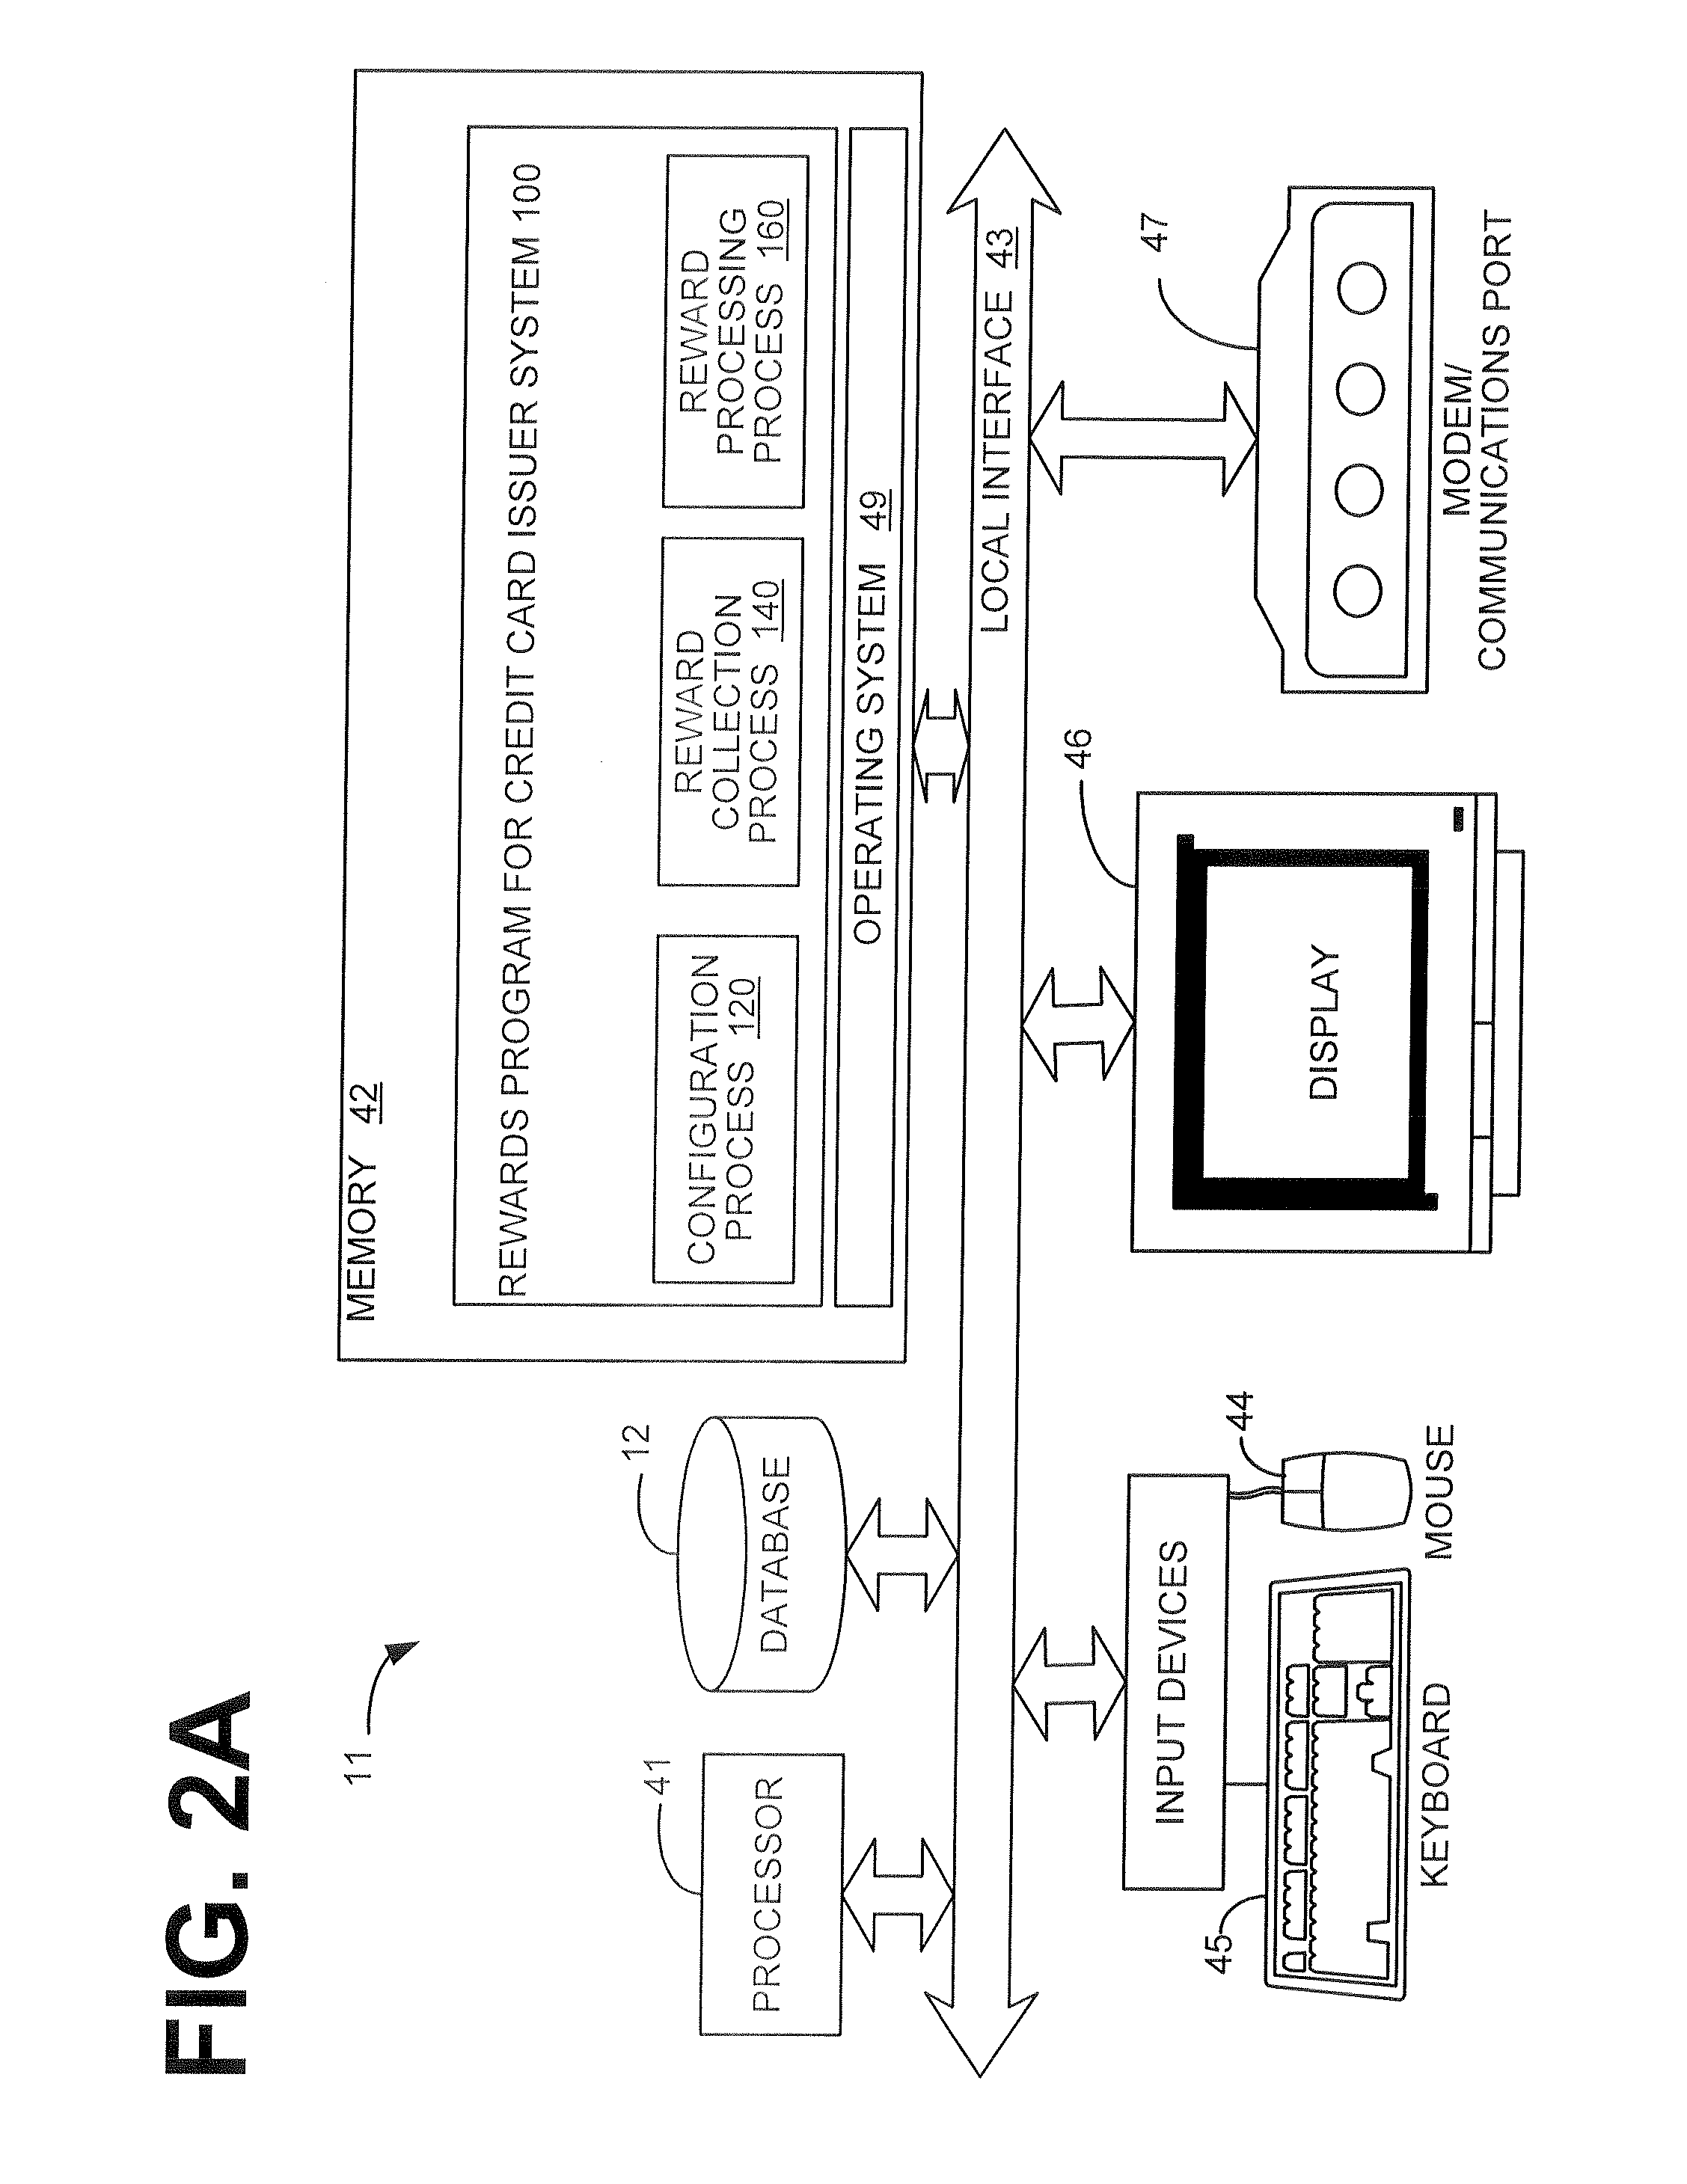 System and method for rewards program for credit card issuer